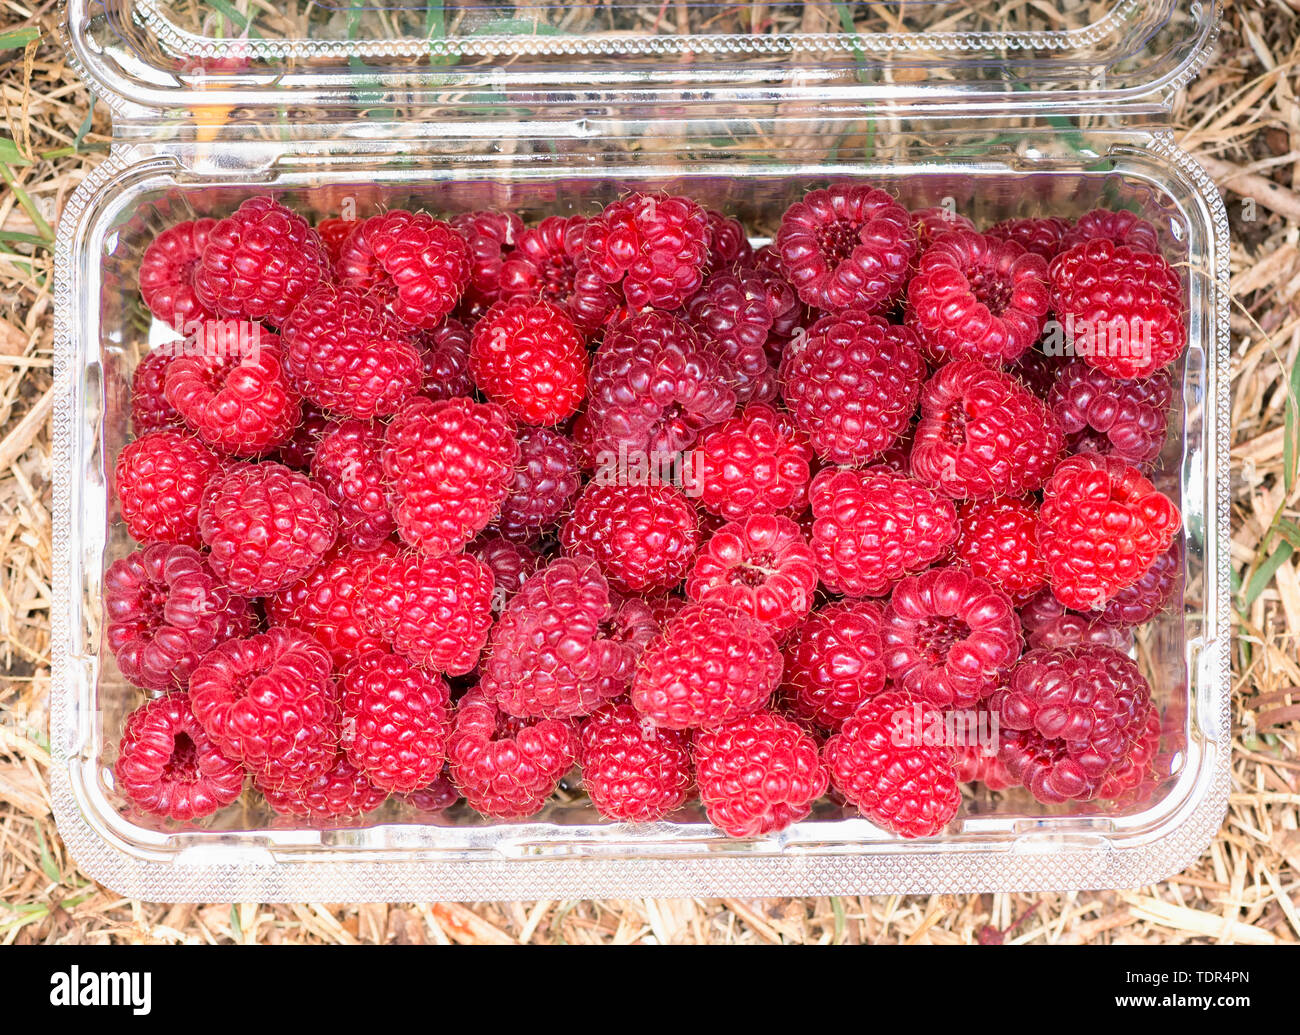 Download A Closeup Photo Of Delicious Raspberries In Plastic Container Stock Photo Alamy Yellowimages Mockups